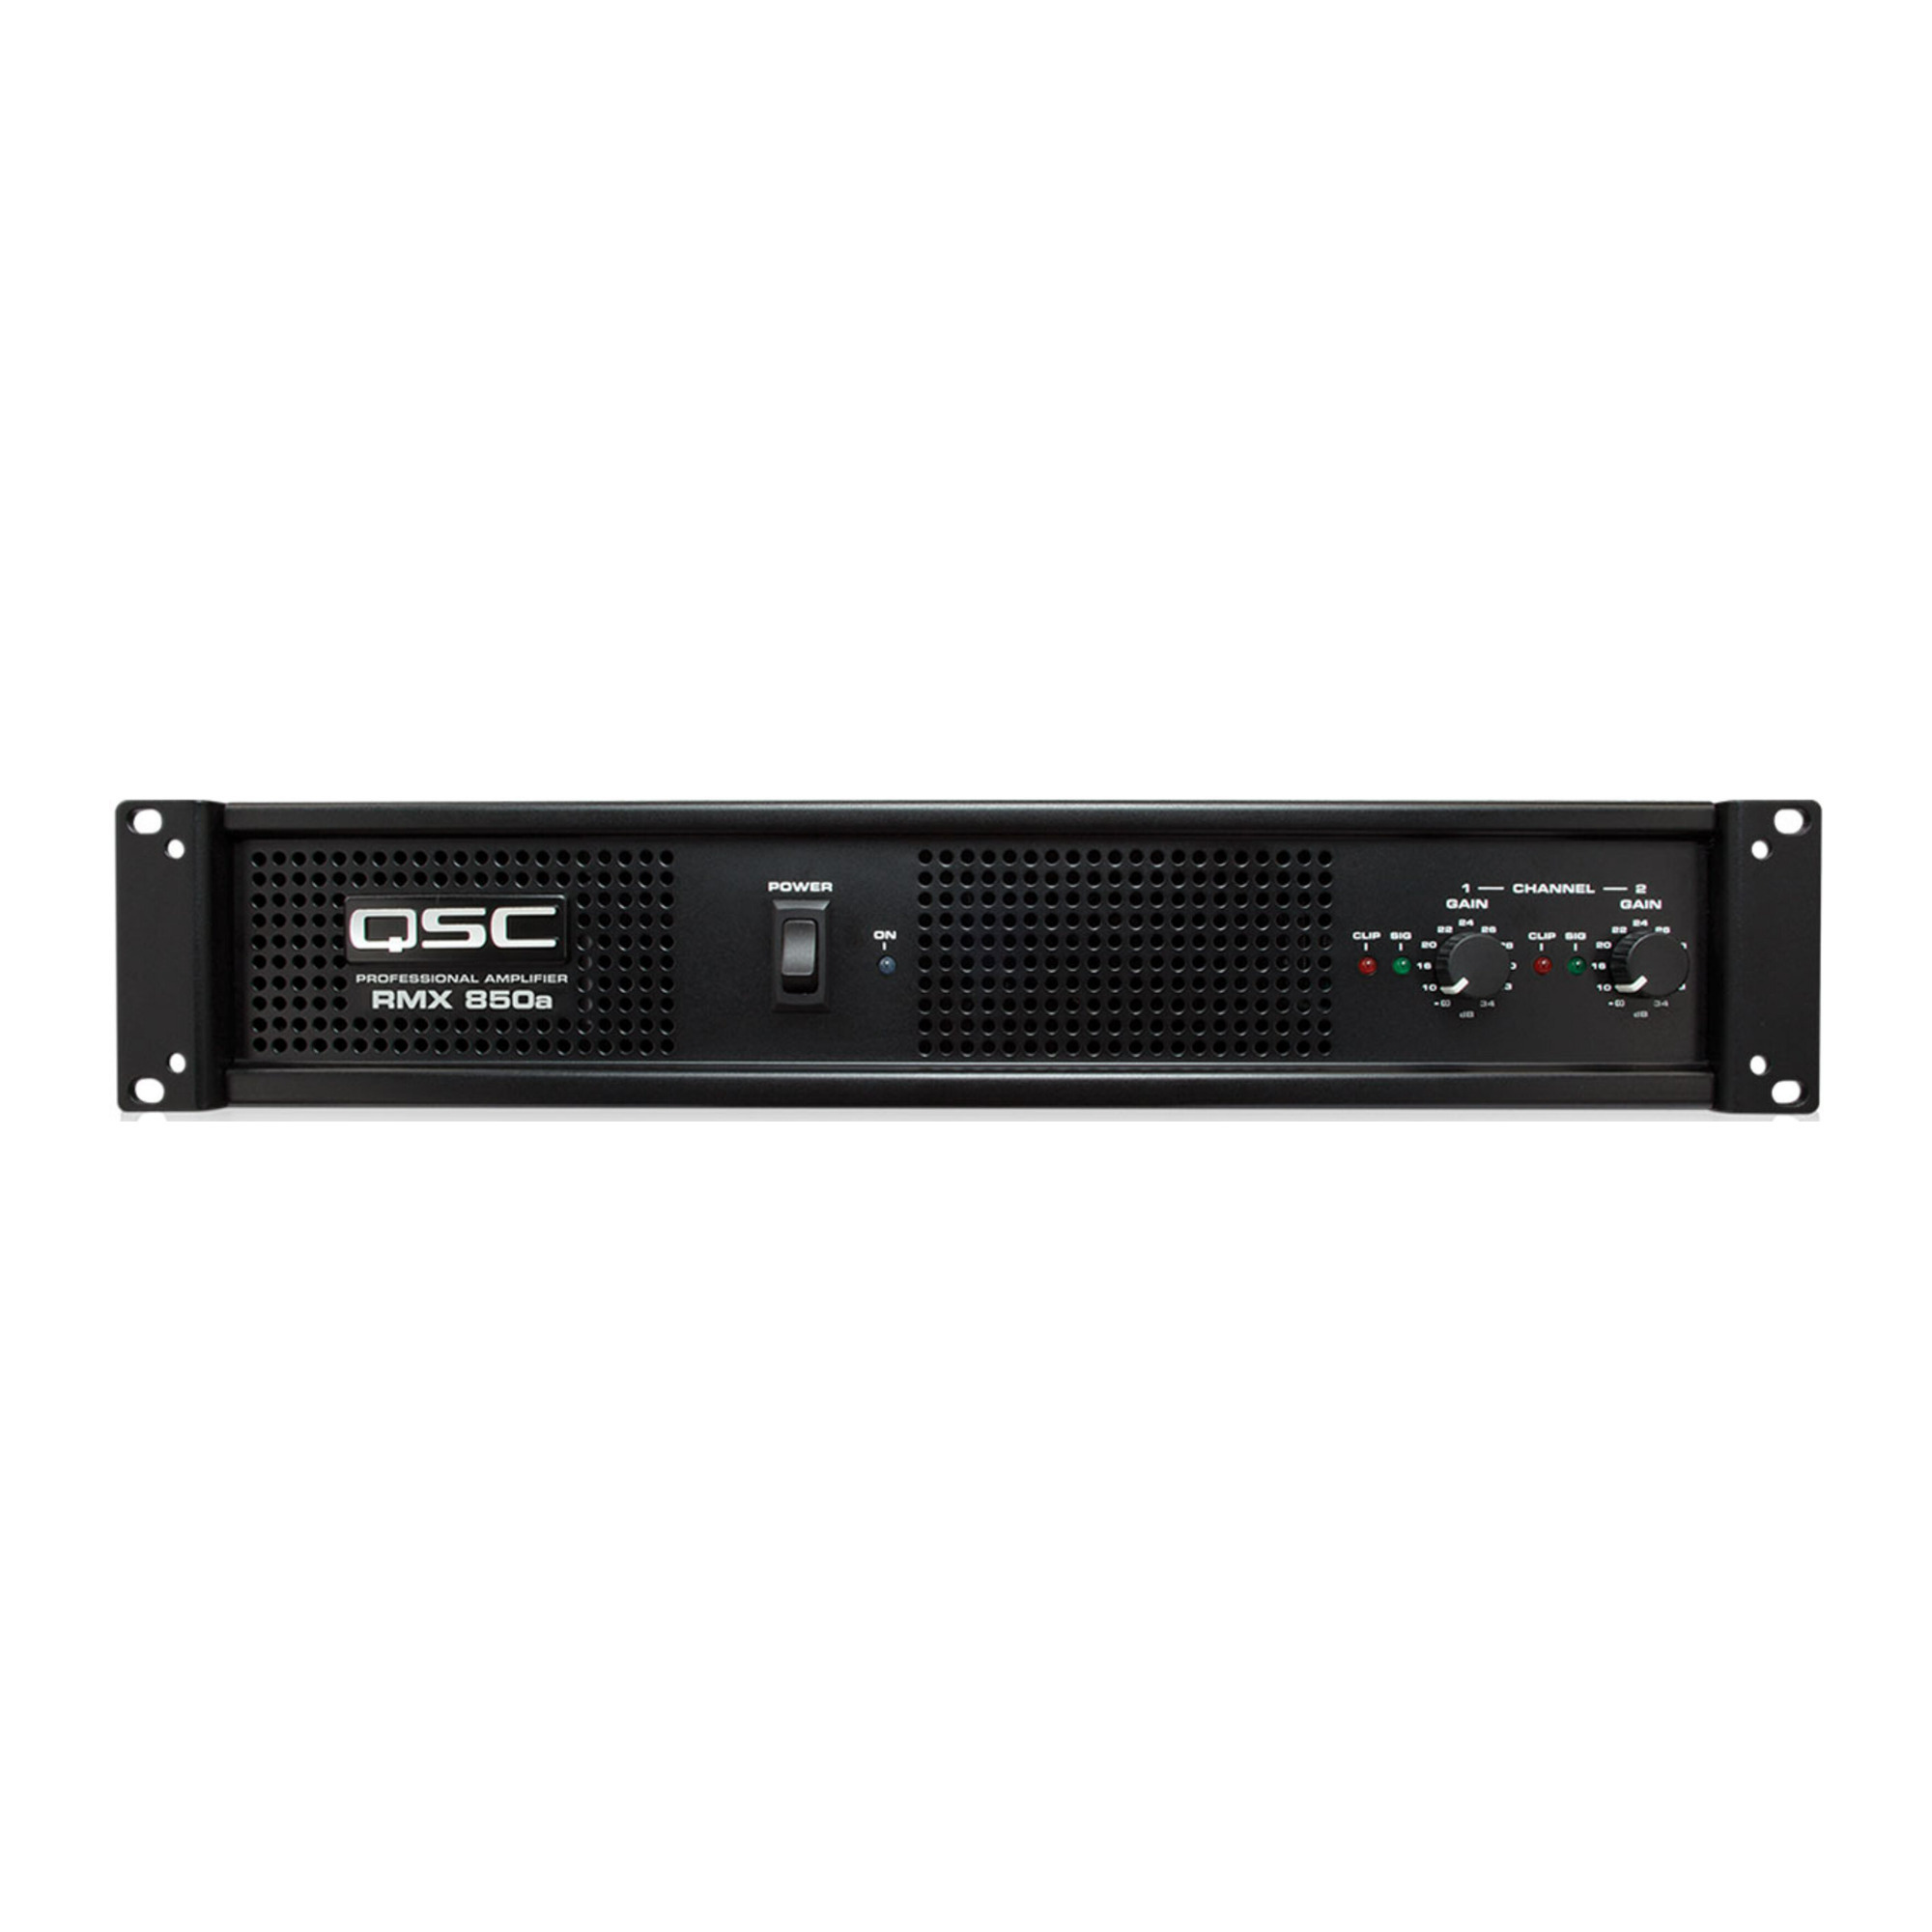 850a Professional Performance Two Channels Compact Power Amplifier with LED Indicators in Black - QSC RMX850A